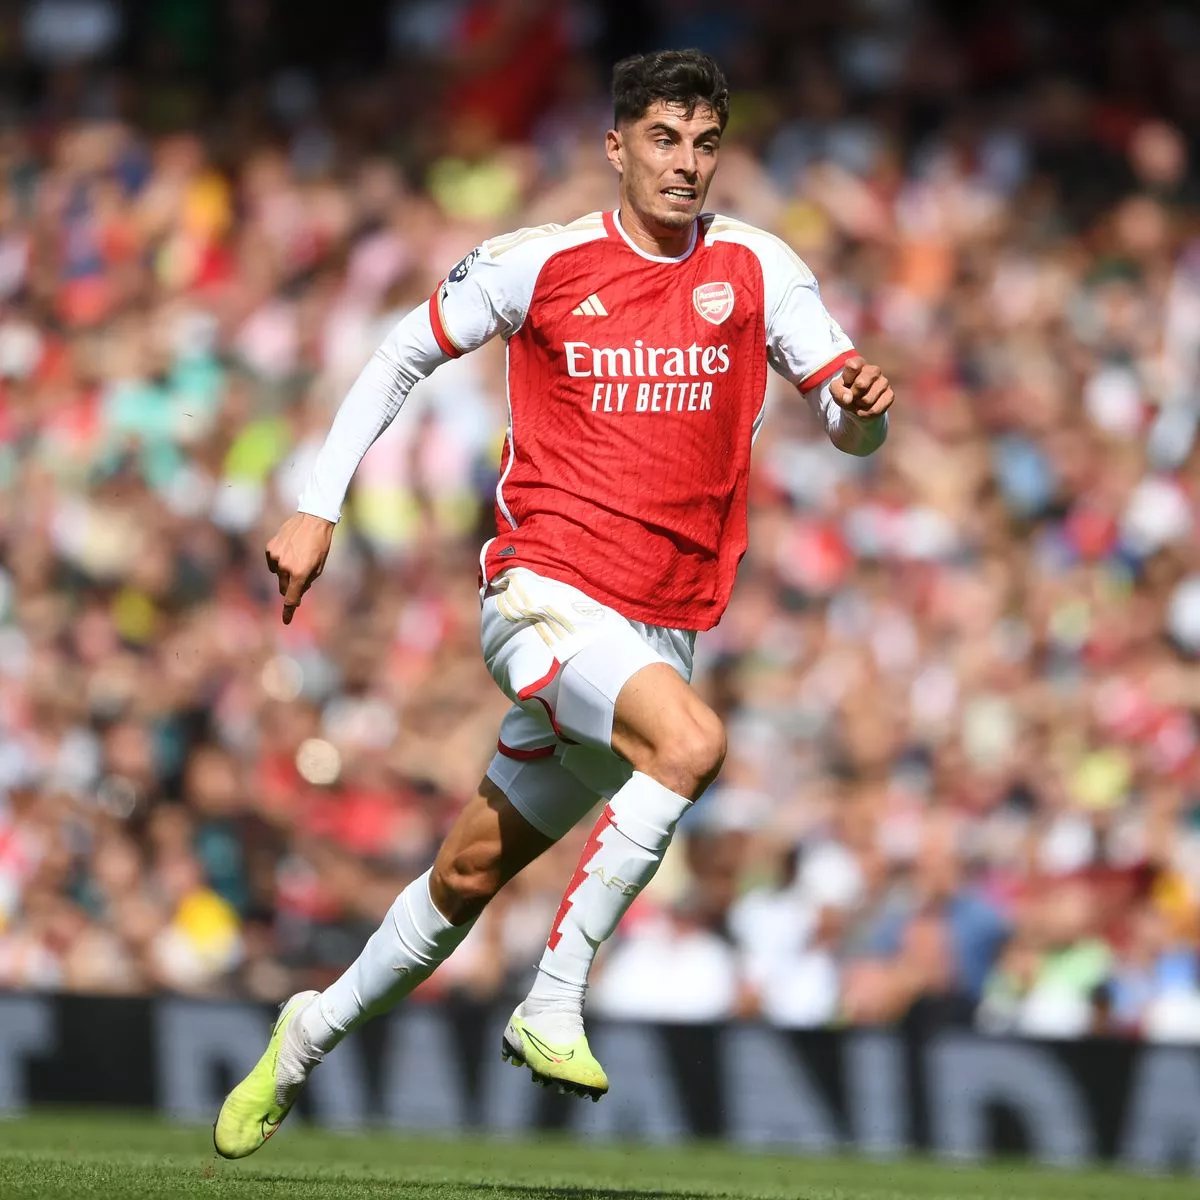 Gunners on X: "Lauren: "Kai Havertz is a top player, and top players at  some point always perform, so I have no doubts about him. He's a great  player but sometimes new